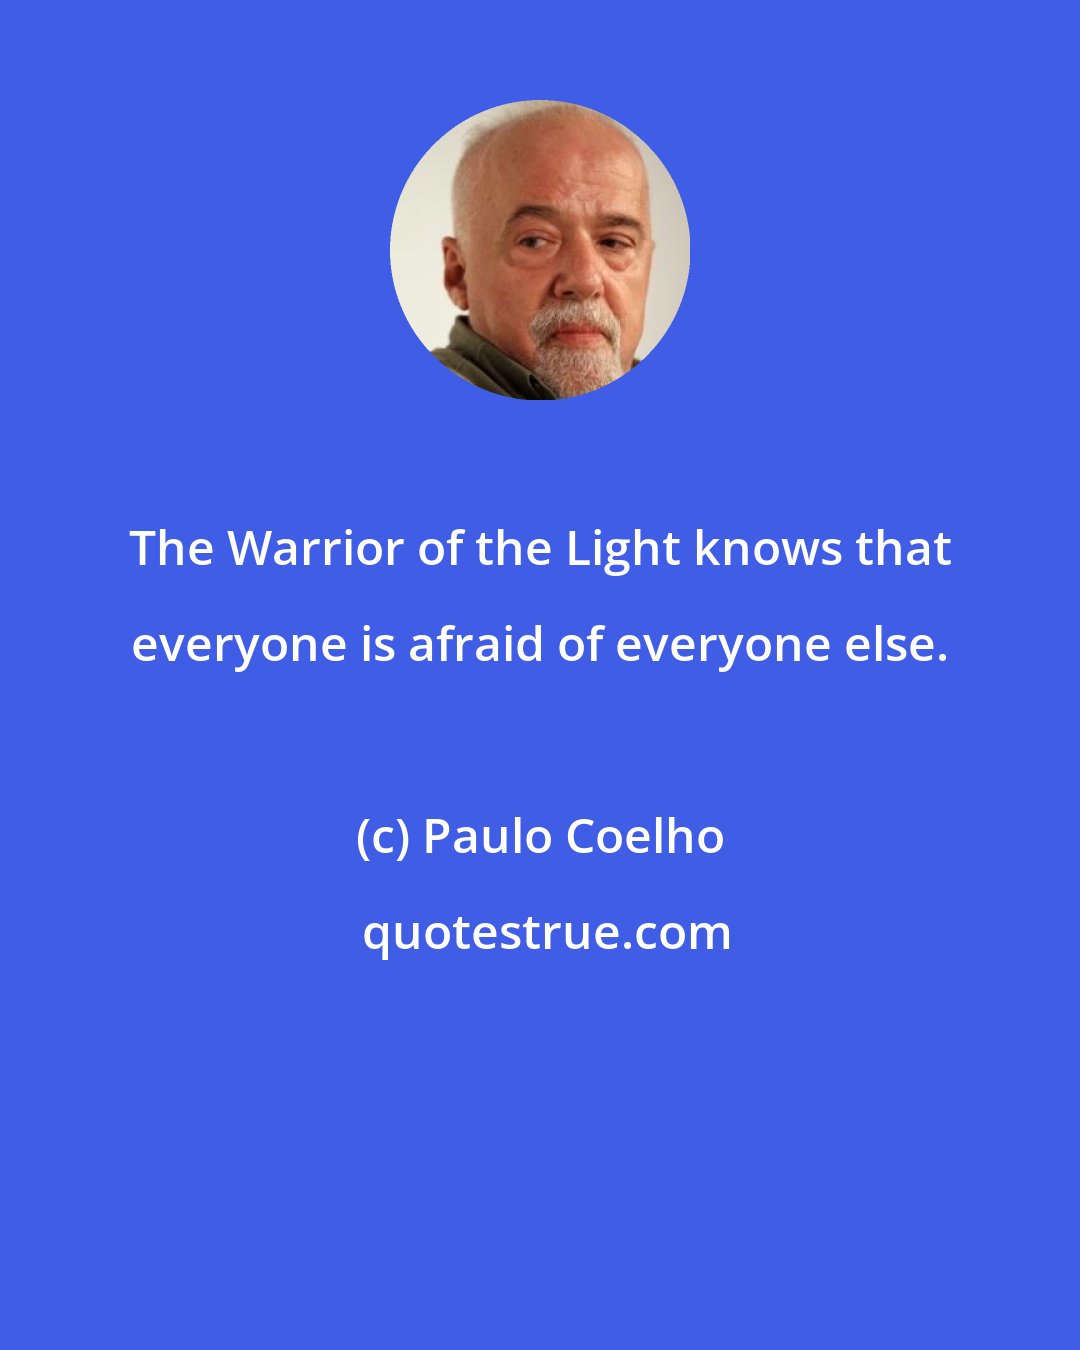 Paulo Coelho: The Warrior of the Light knows that everyone is afraid of everyone else.